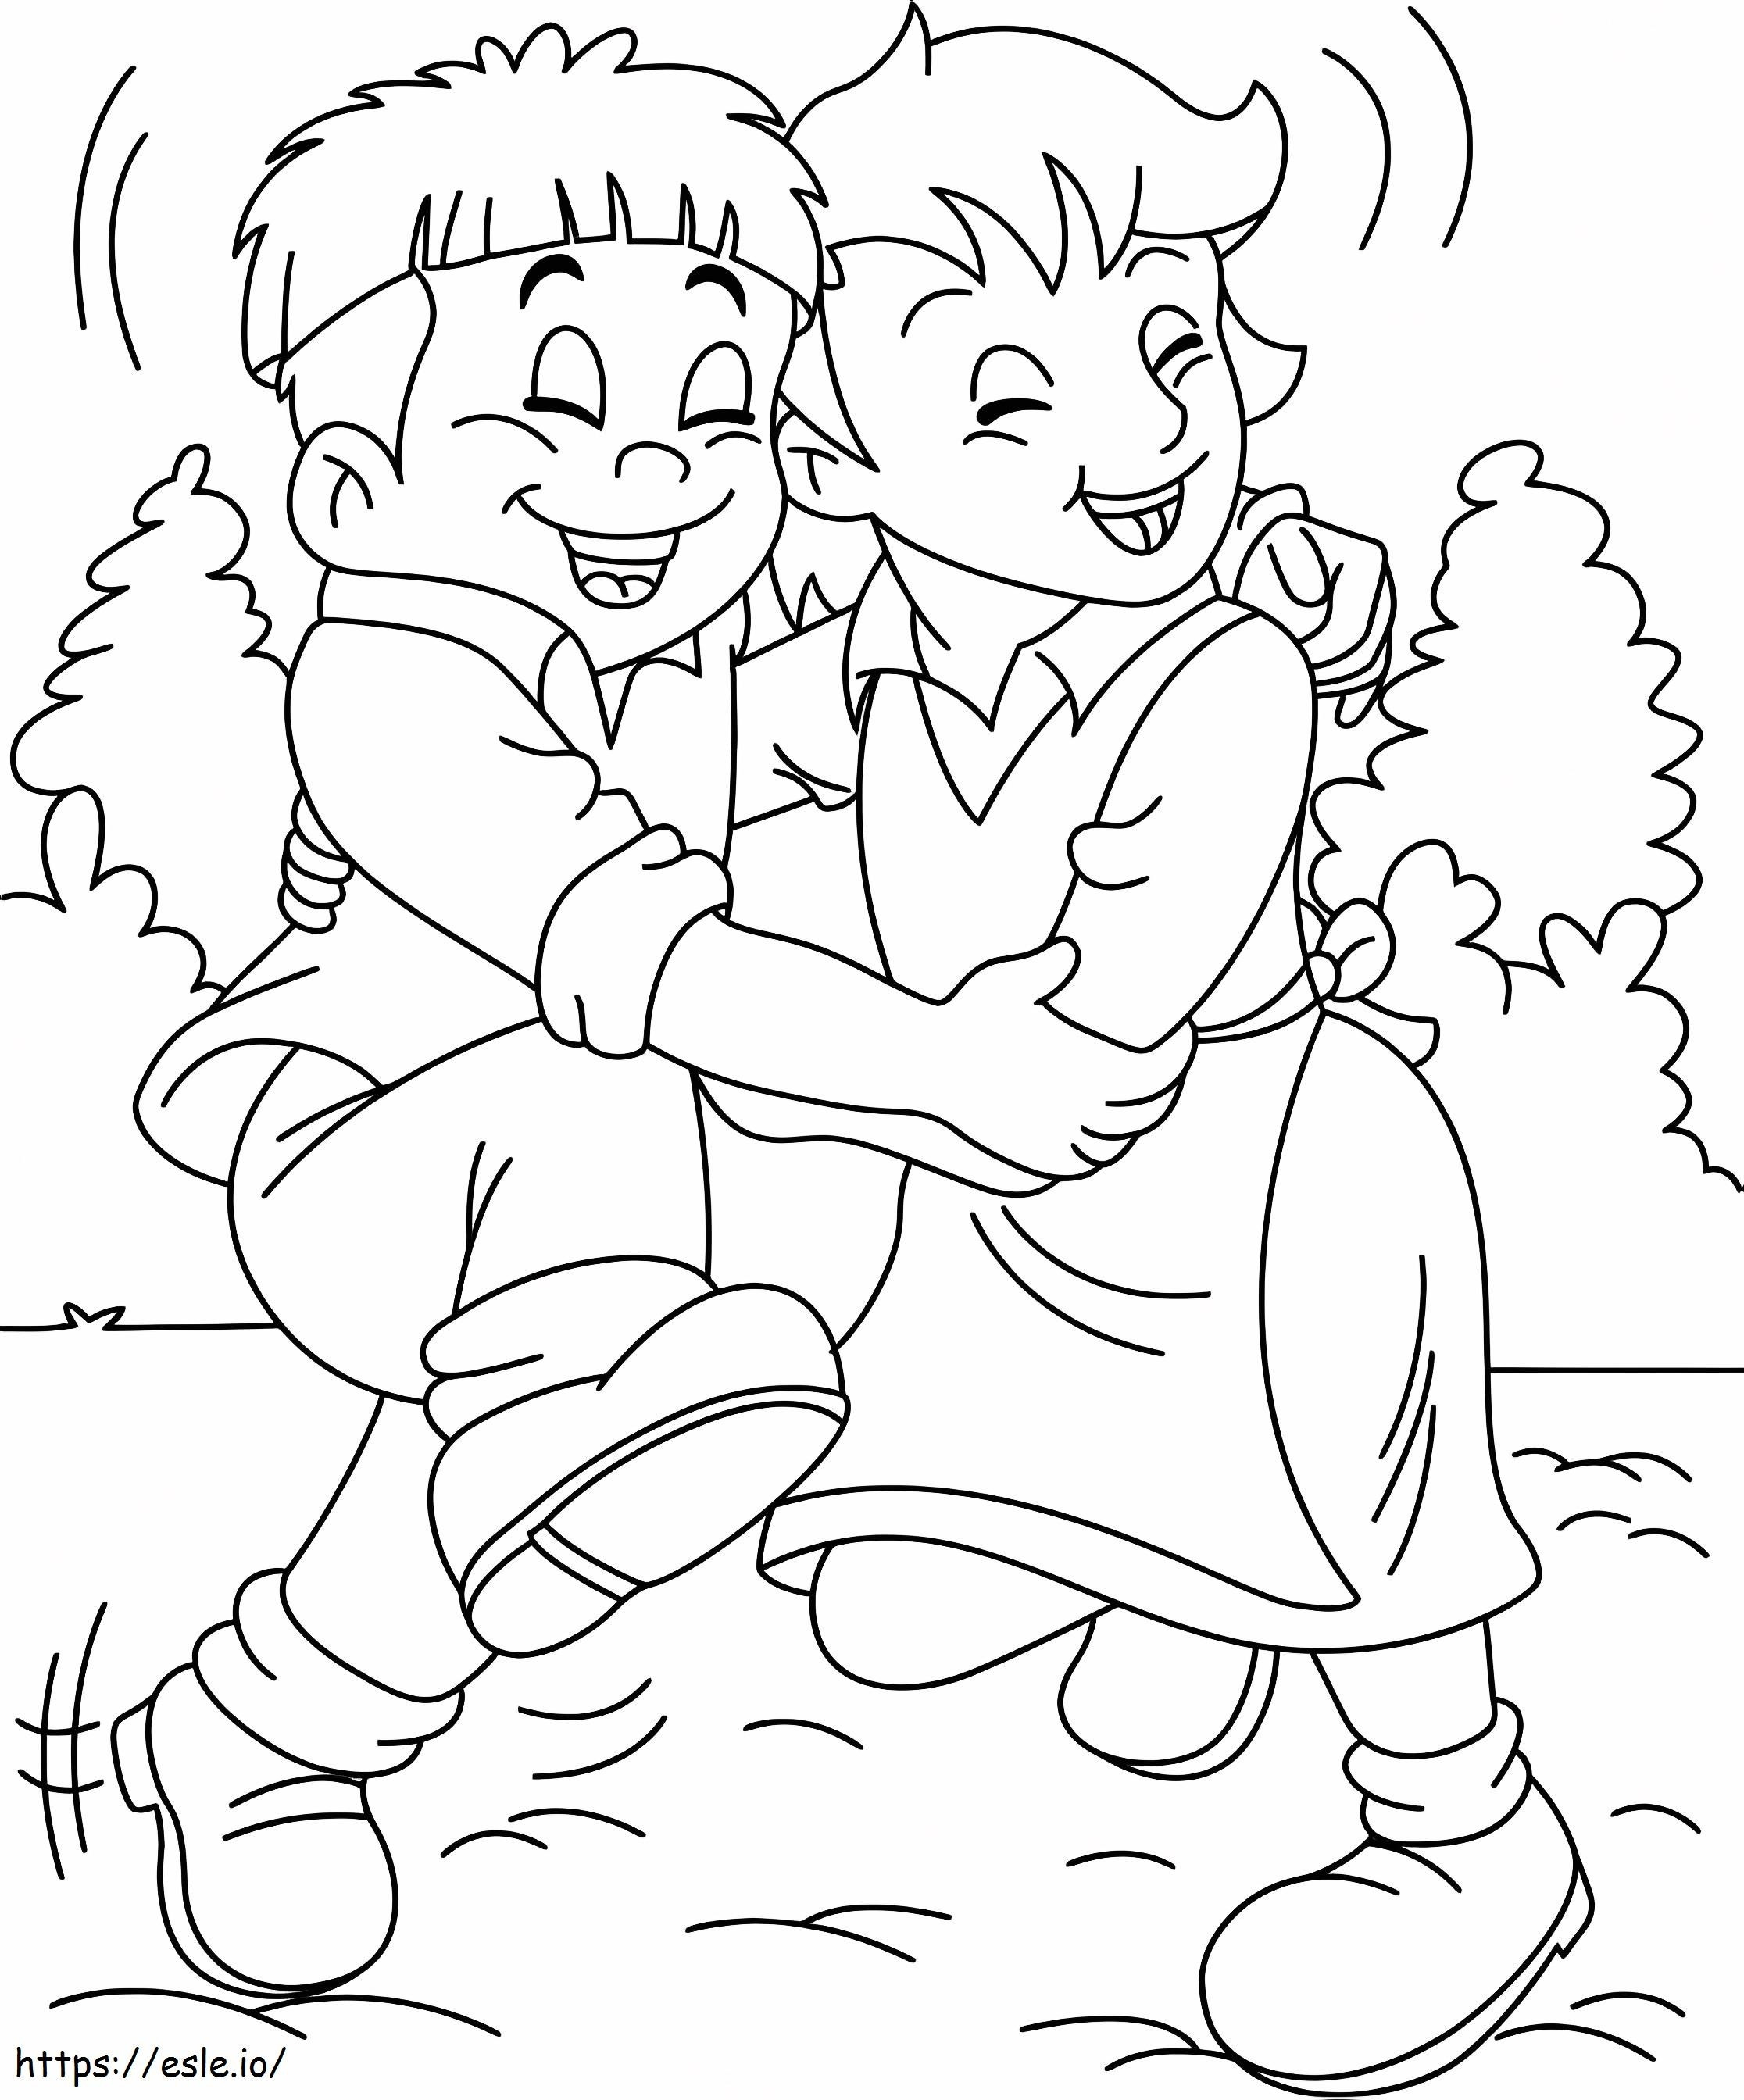 Awesome Friendship coloring page